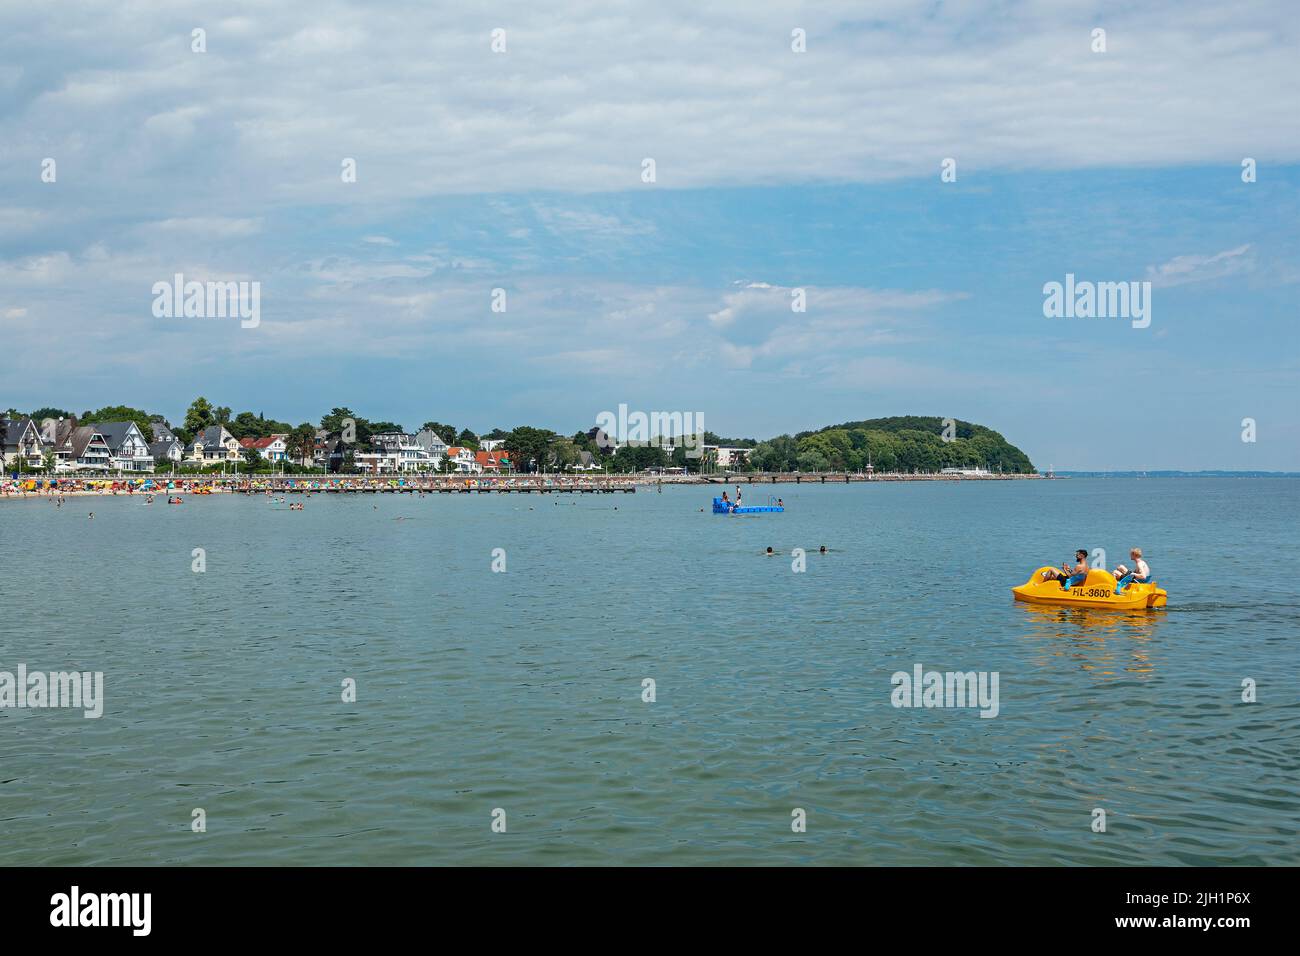 Beach, pedal boat, houses at the seafront, Travemünde, Lübeck, Schleswig-Holstein, Germany Stock Photo